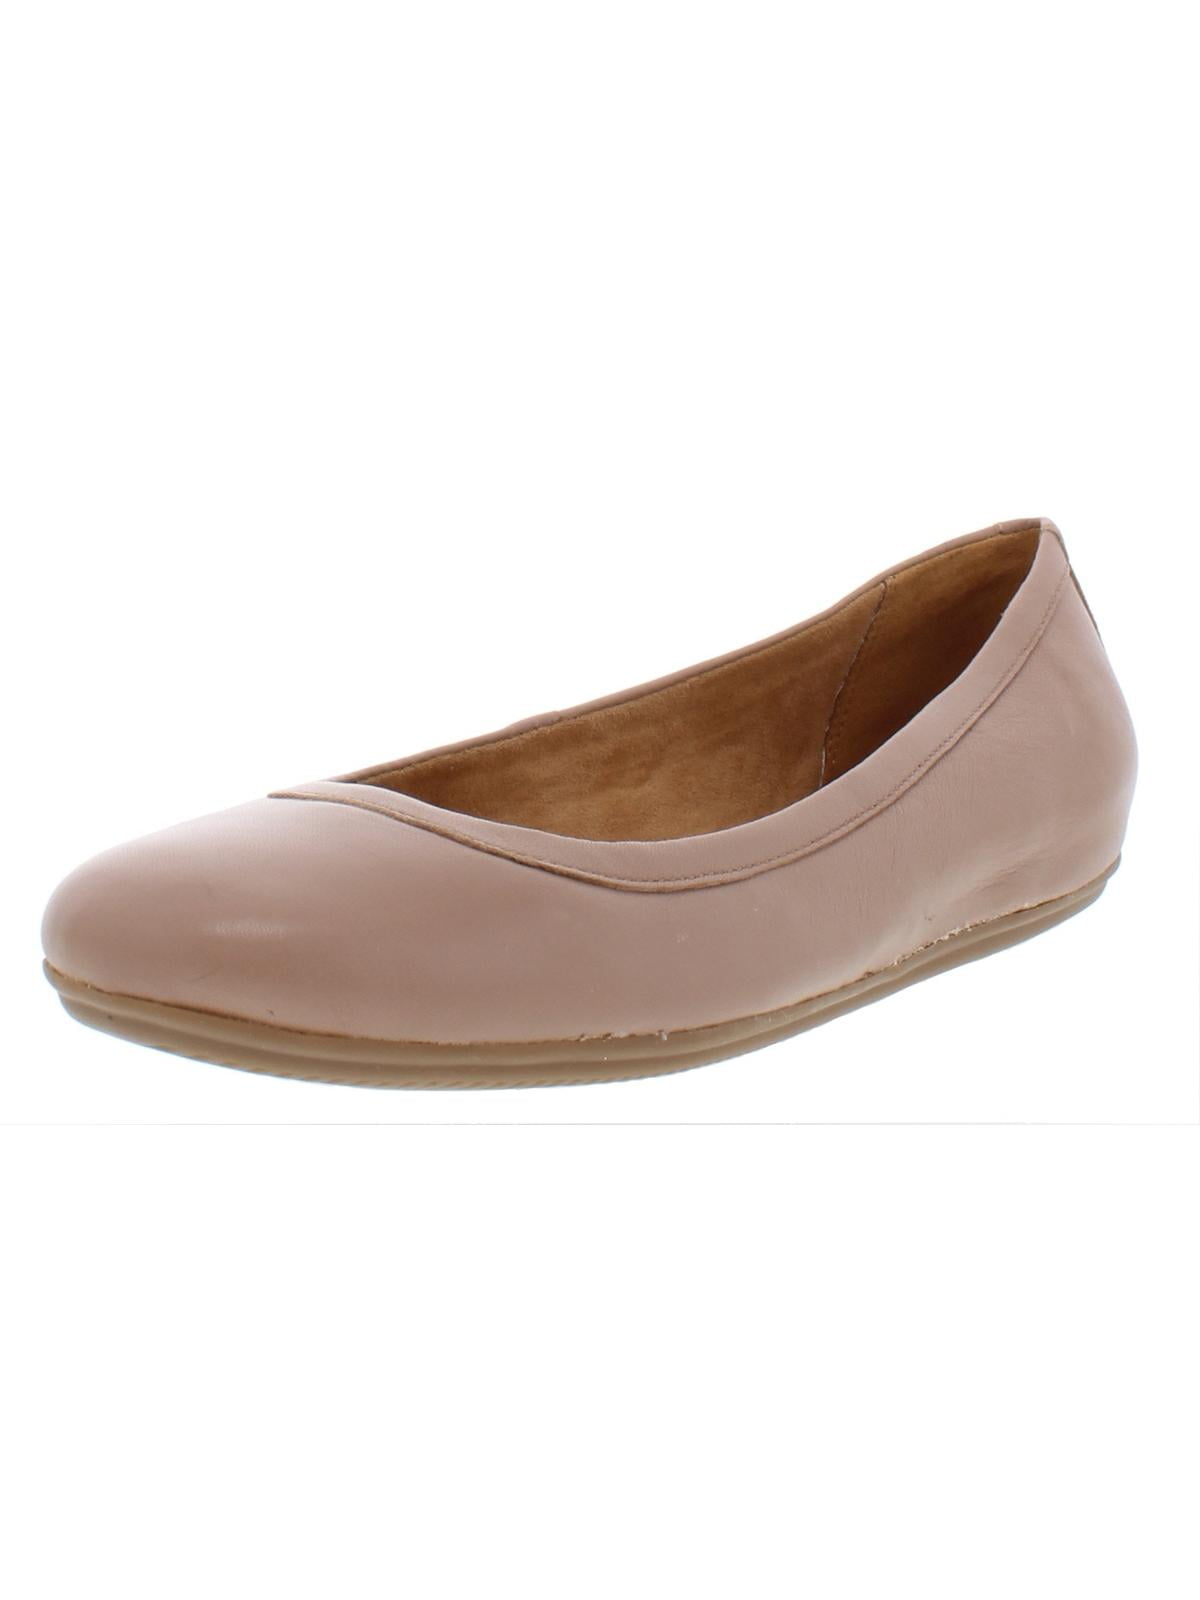 Naturalizer Womens Brittany Leather Slip On Ballet Flats Beige 6.5 ...